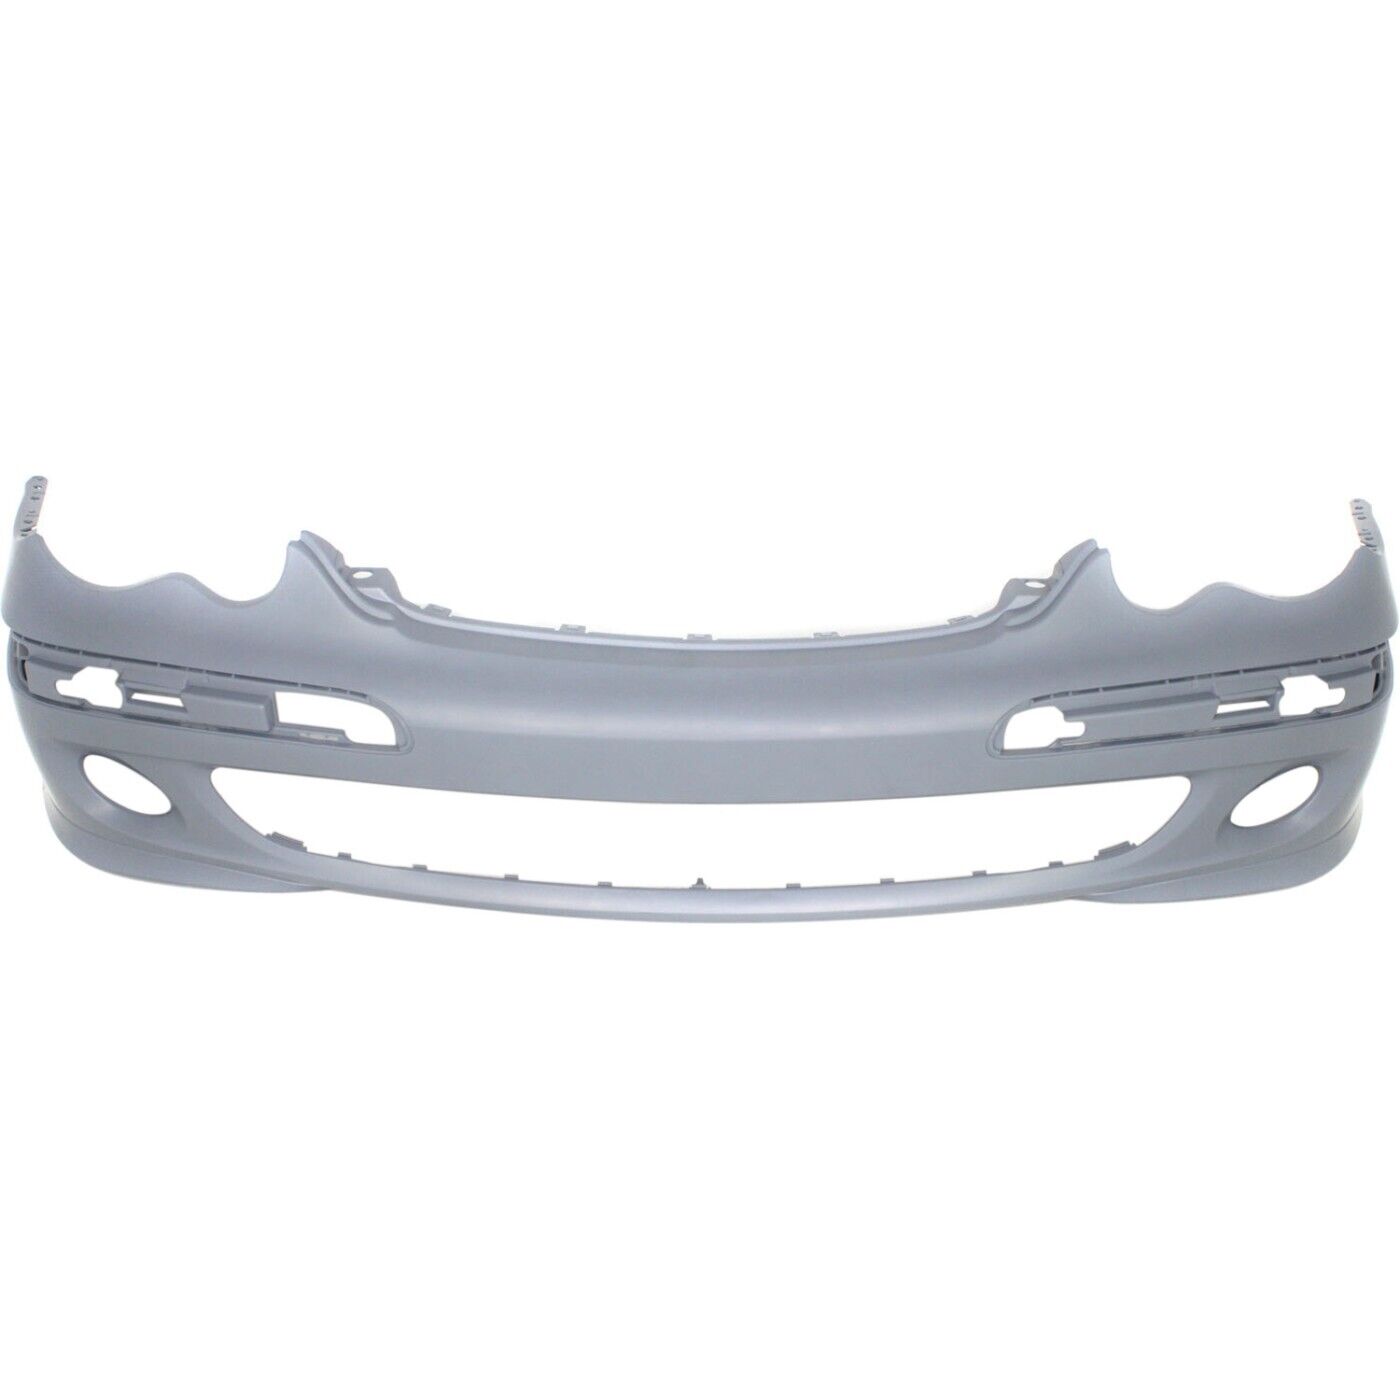 Front Bumper Cover For 2005-2007 M Benz C230 w/ fog lamp holes 06-07 C280 Primed